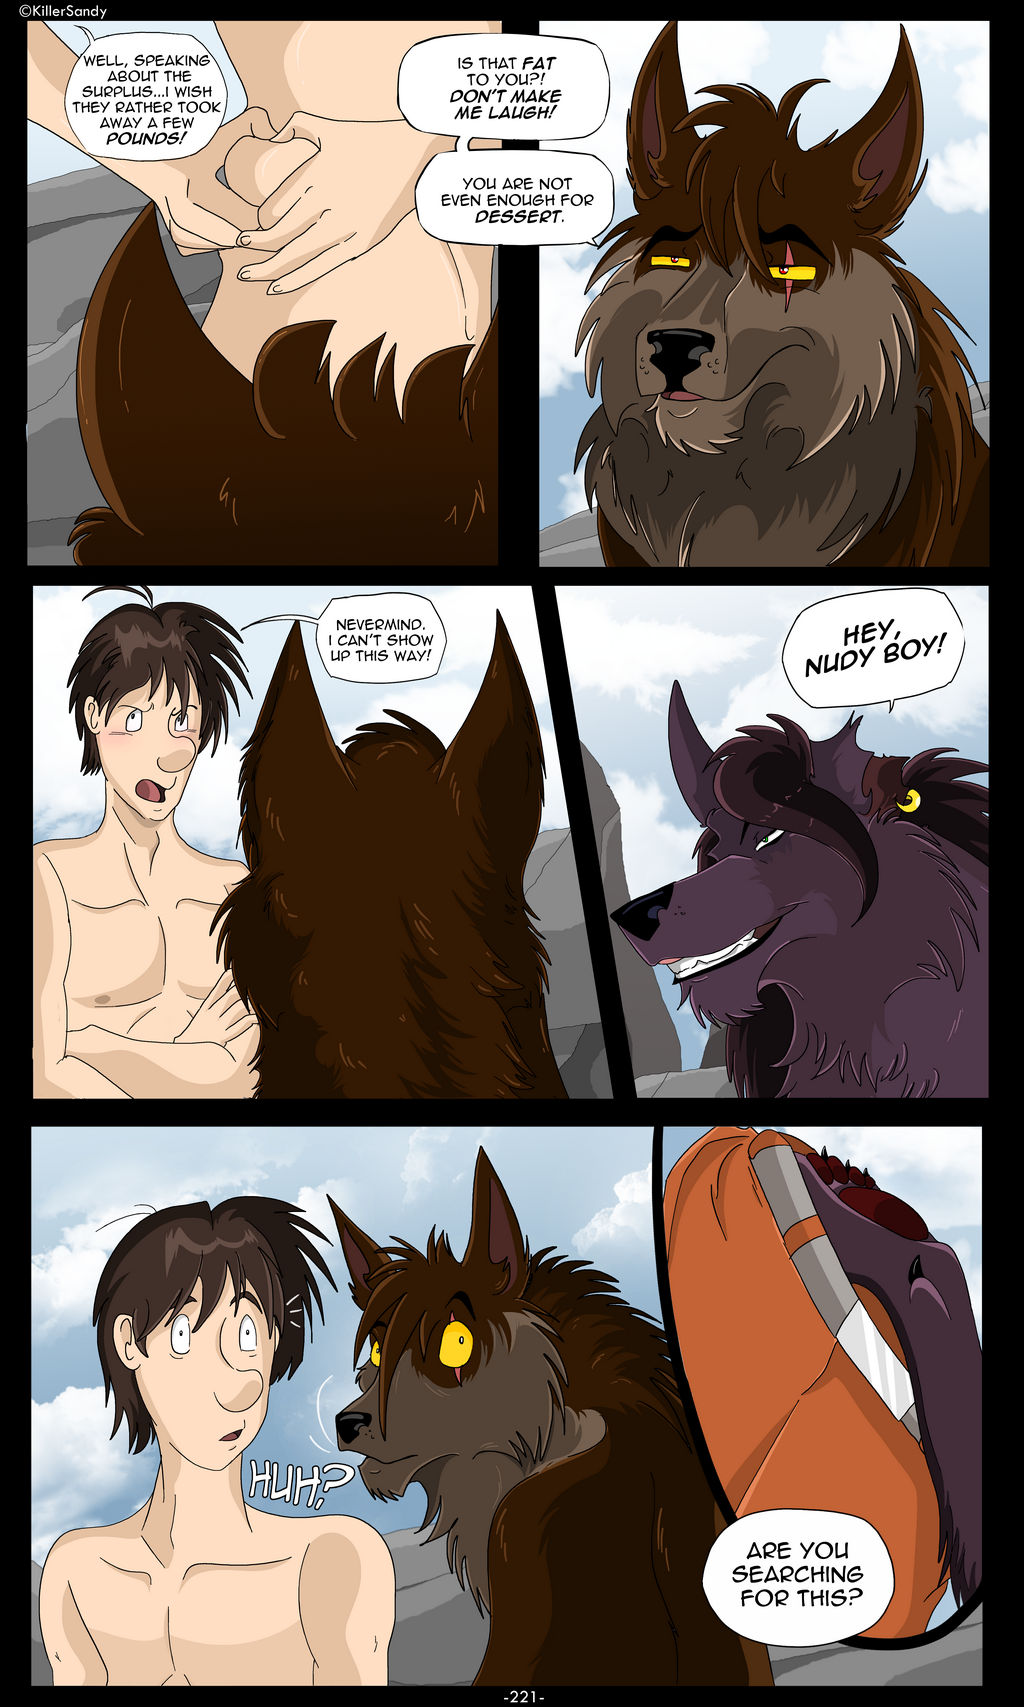 The Prince of the Moonlight Stone page 221